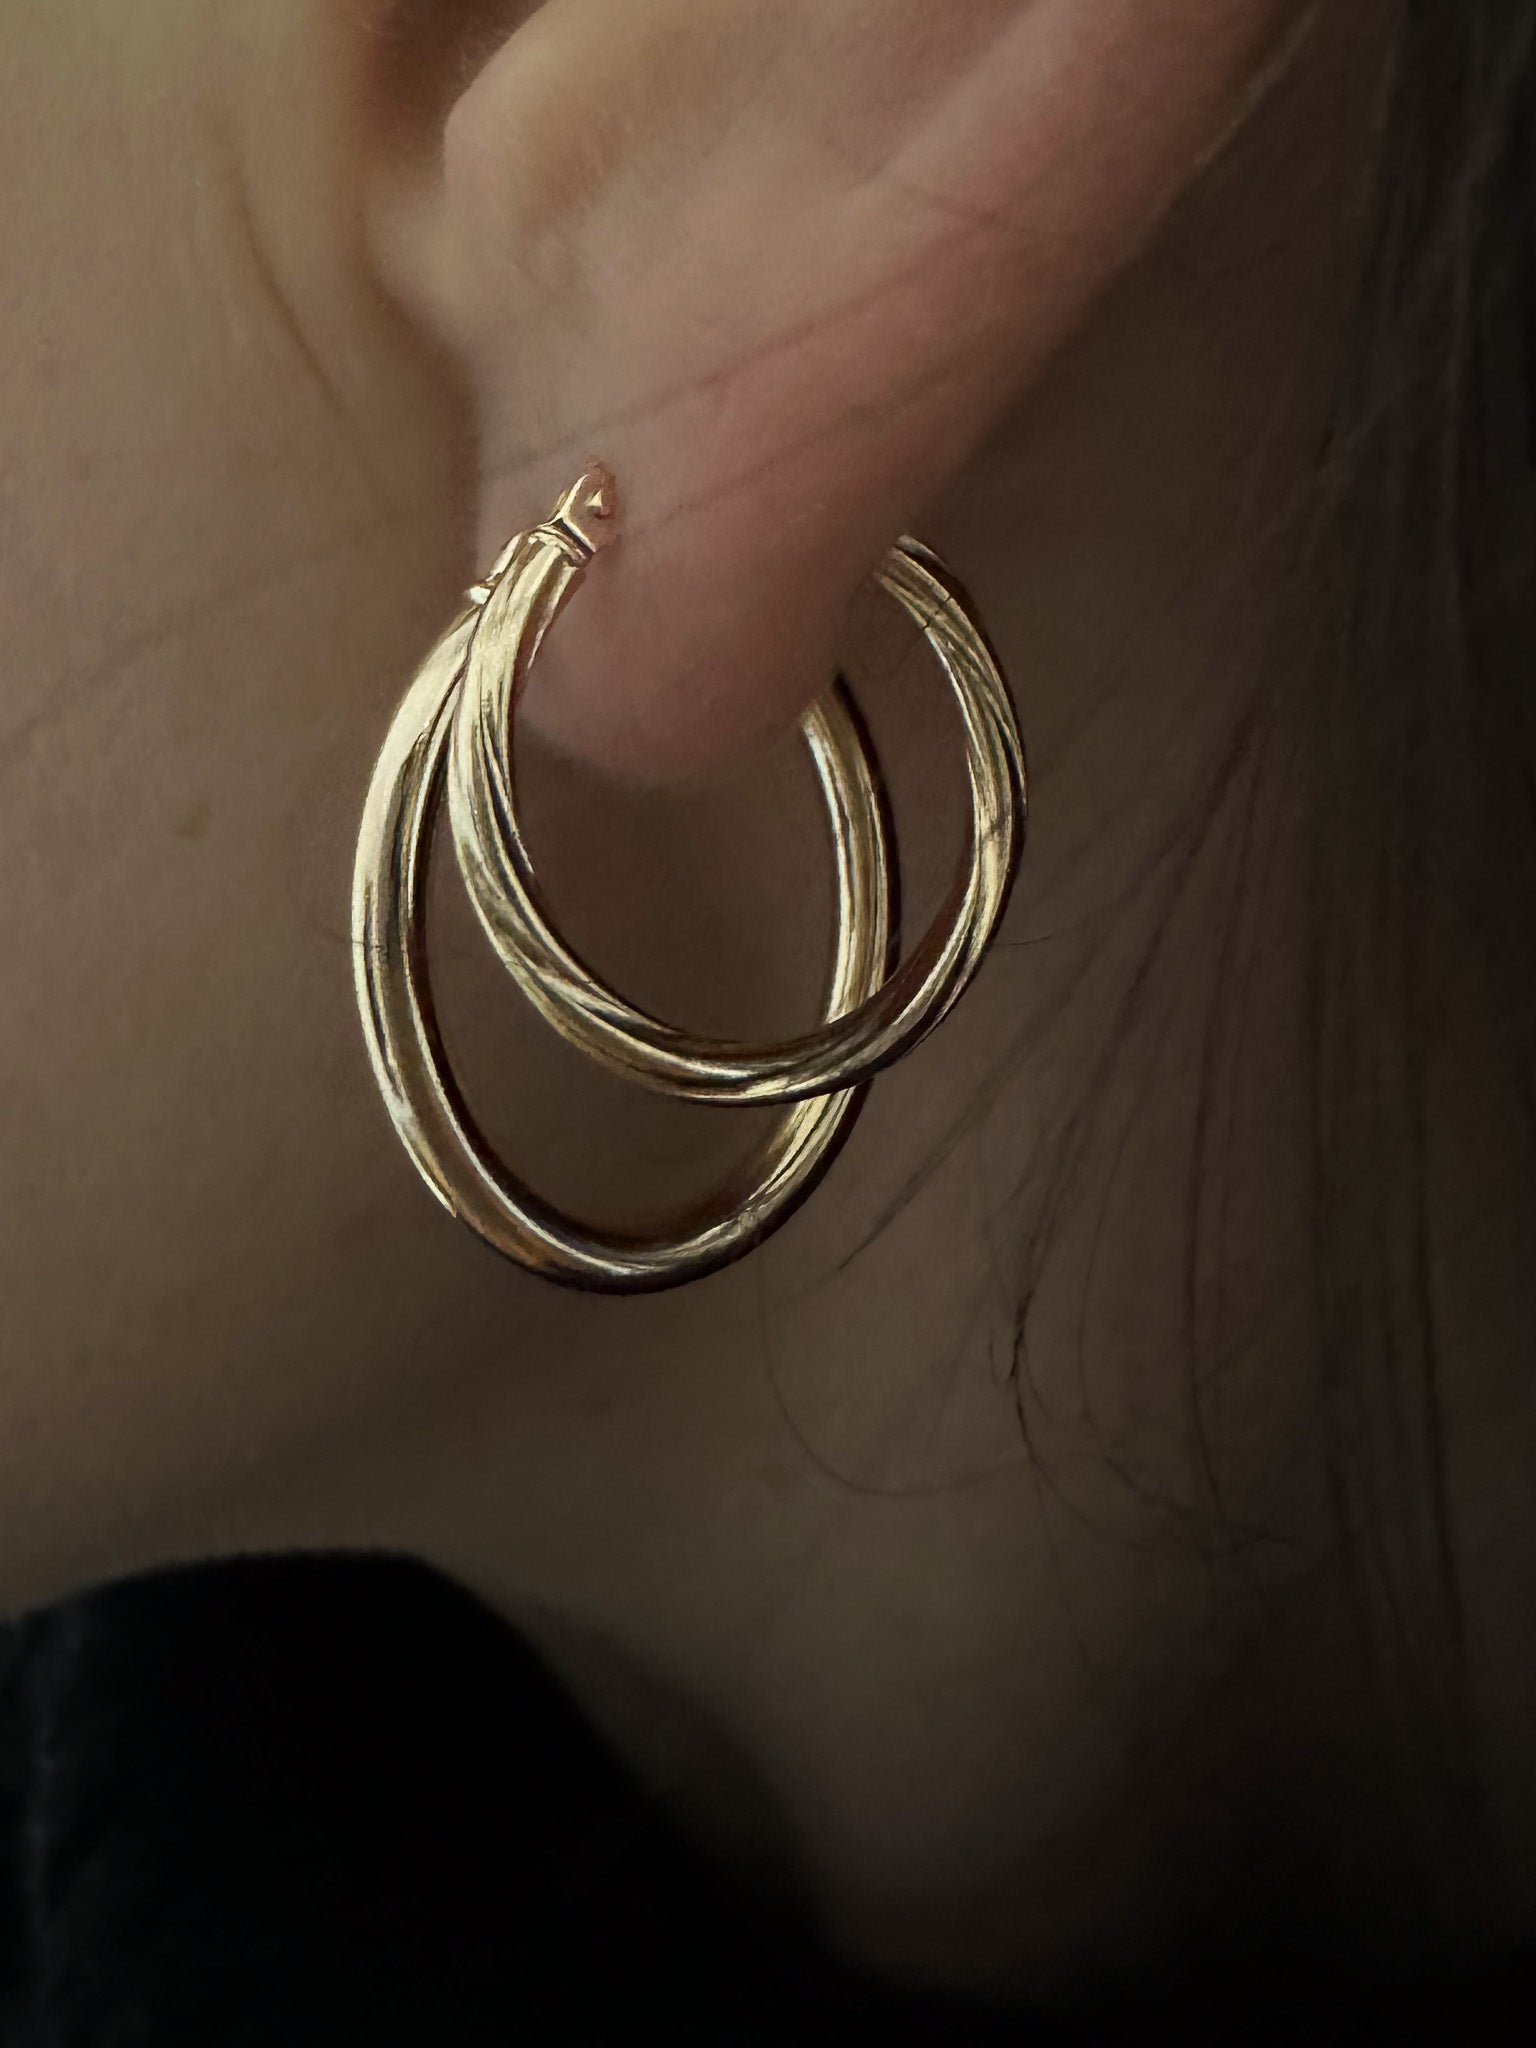 model stacks and layers her gold hoop earrings with her multiple ear piercings